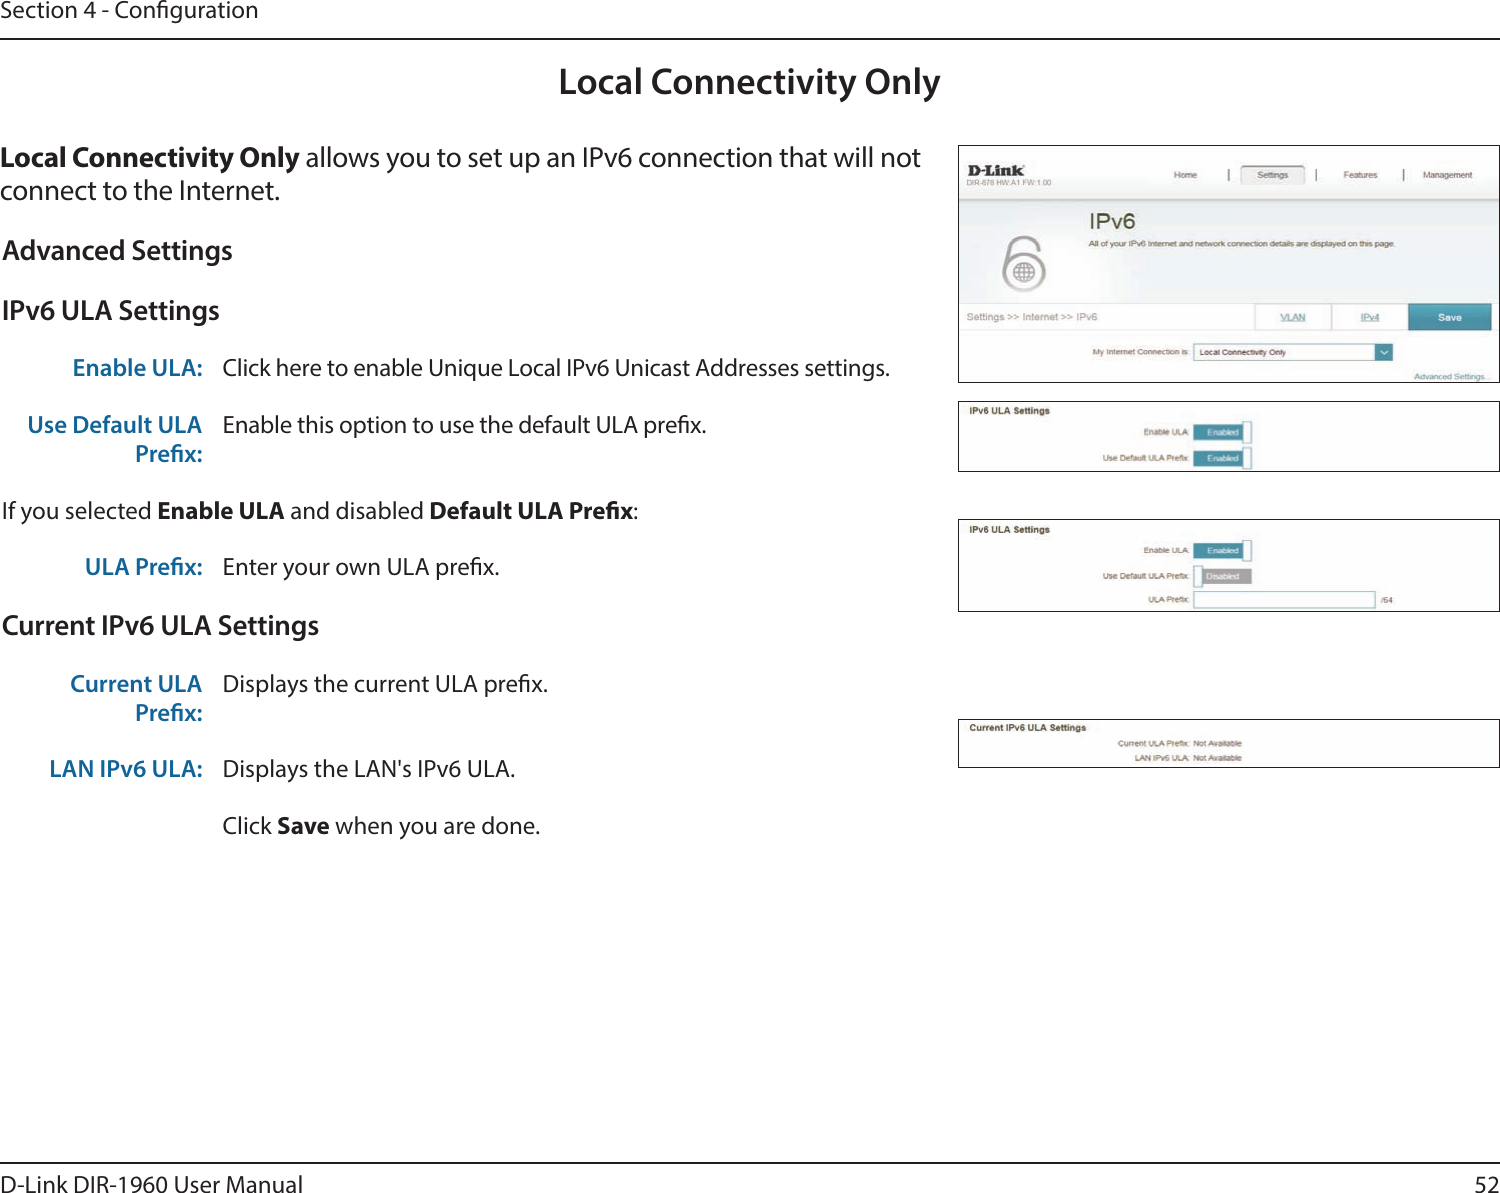 52D-Link DIR-1960 User ManualSection 4 - CongurationLocal Connectivity OnlyLocal Connectivity Only allows you to set up an IPv6 connection that will not connect to the Internet.Advanced SettingsIPv6 ULA SettingsEnable ULA: Click here to enable Unique Local IPv6 Unicast Addresses settings.Use Default ULA Prex:Enable this option to use the default ULA prex.If you selected Enable ULA and disabled Default ULA Prex:ULA Prex: Enter your own ULA prex.Current IPv6 ULA SettingsCurrent ULA Prex:Displays the current ULA prex. LAN IPv6 ULA: Displays the LAN&apos;s IPv6 ULA.Click Save when you are done.